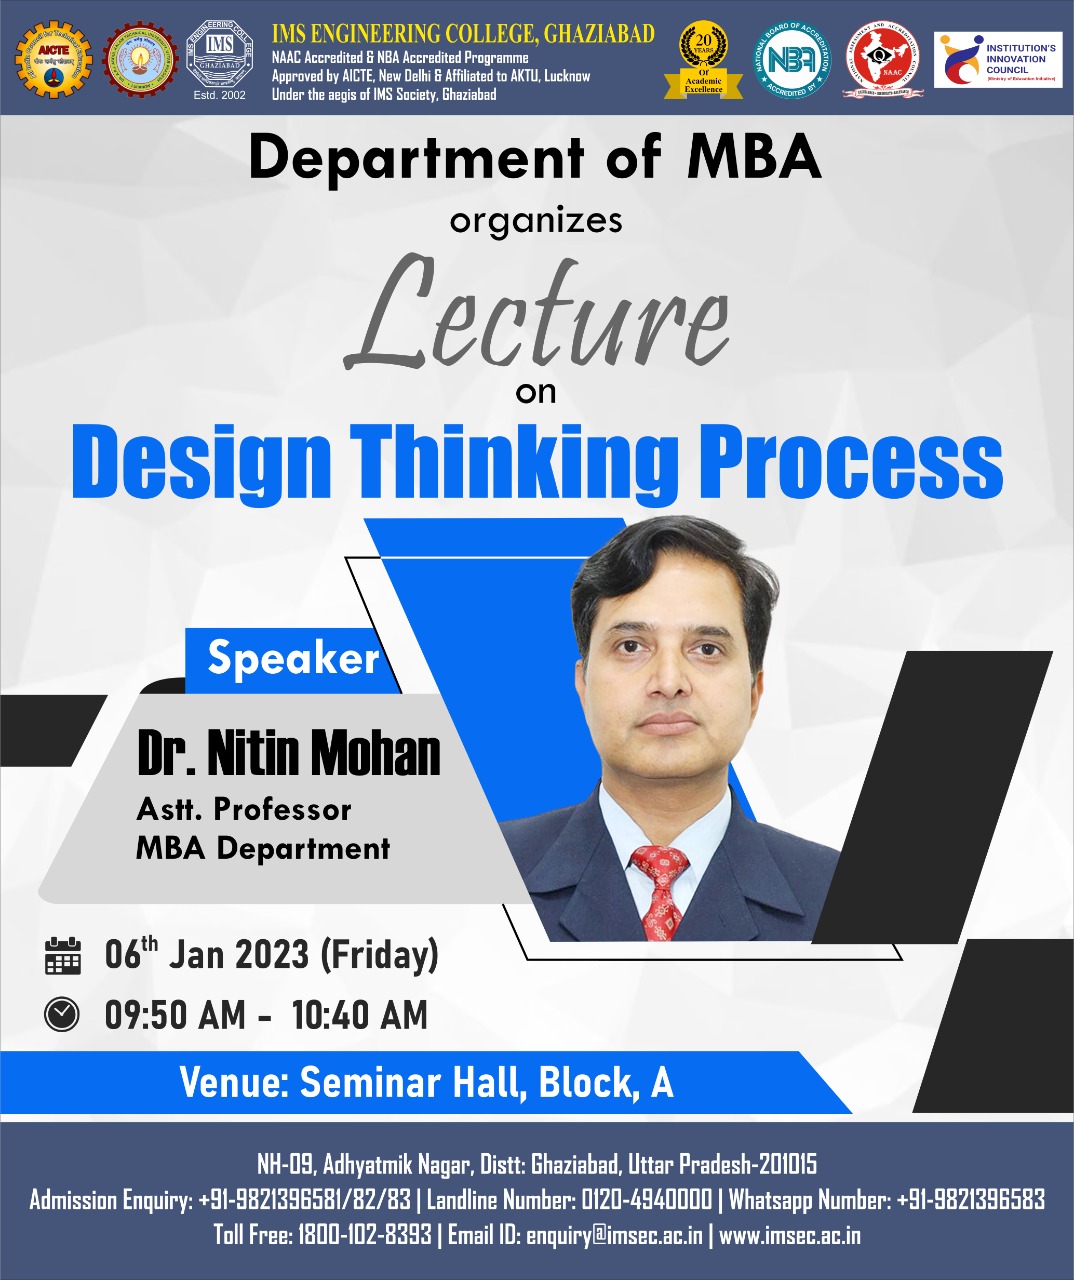 Lecture on Design Thinking Process by Dr. Nitin Mohan